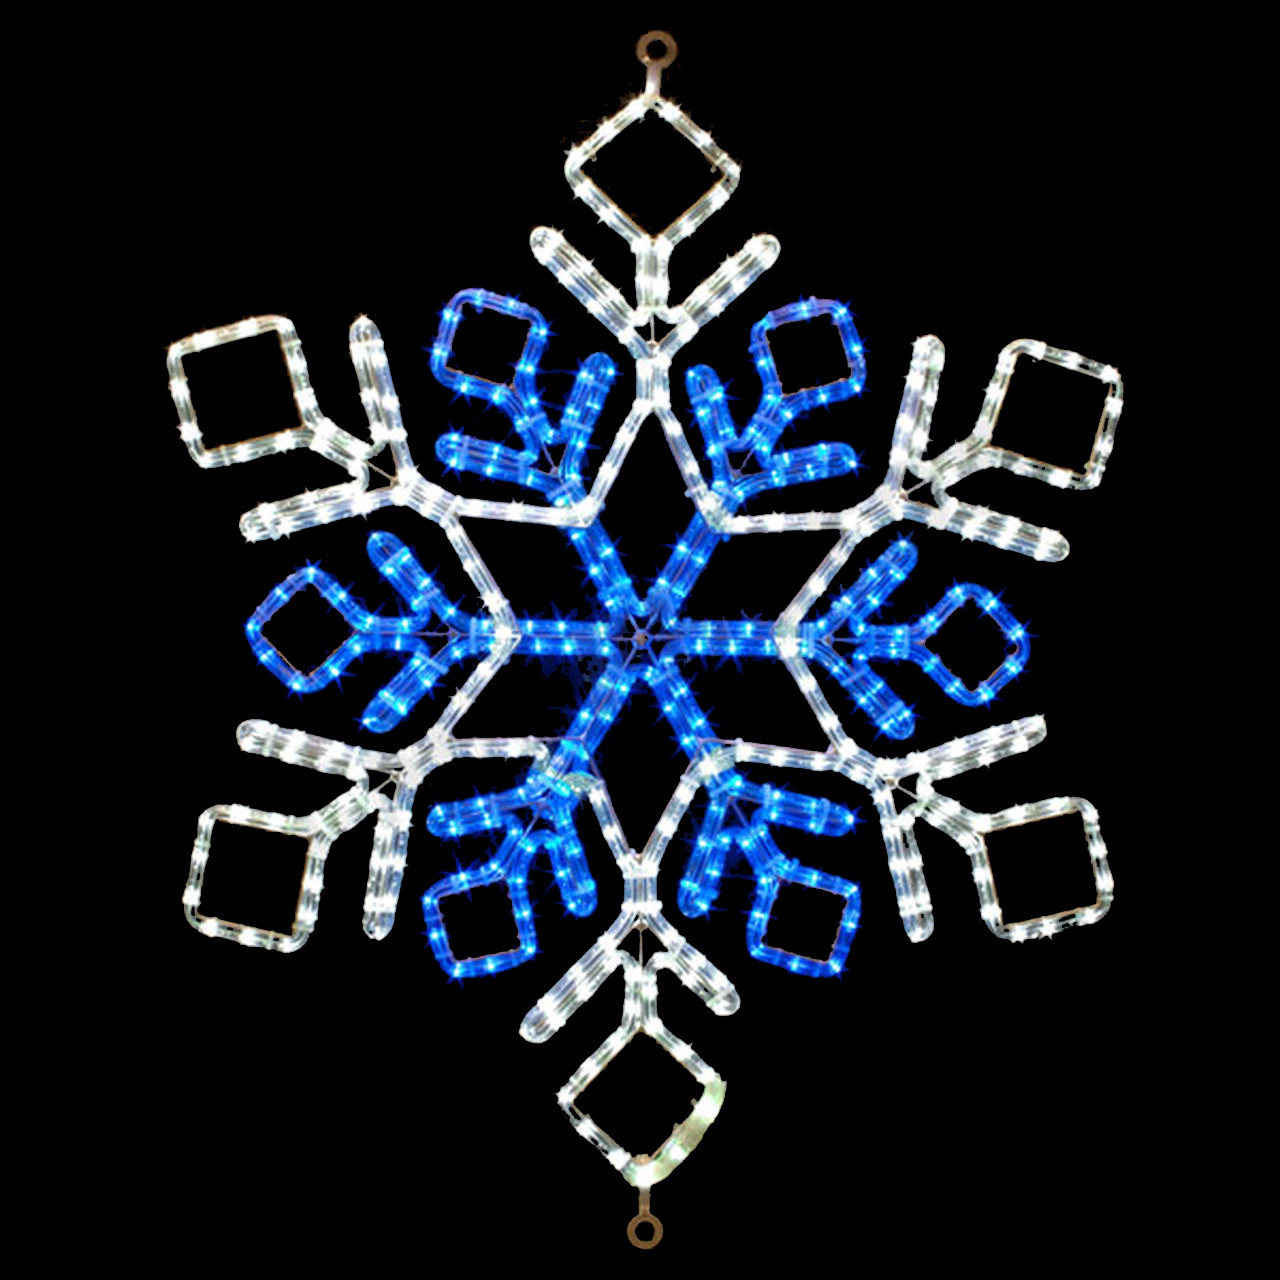 ElectricArt 31 inch Cool White and Blue LED Rope Light Snowflake Motif